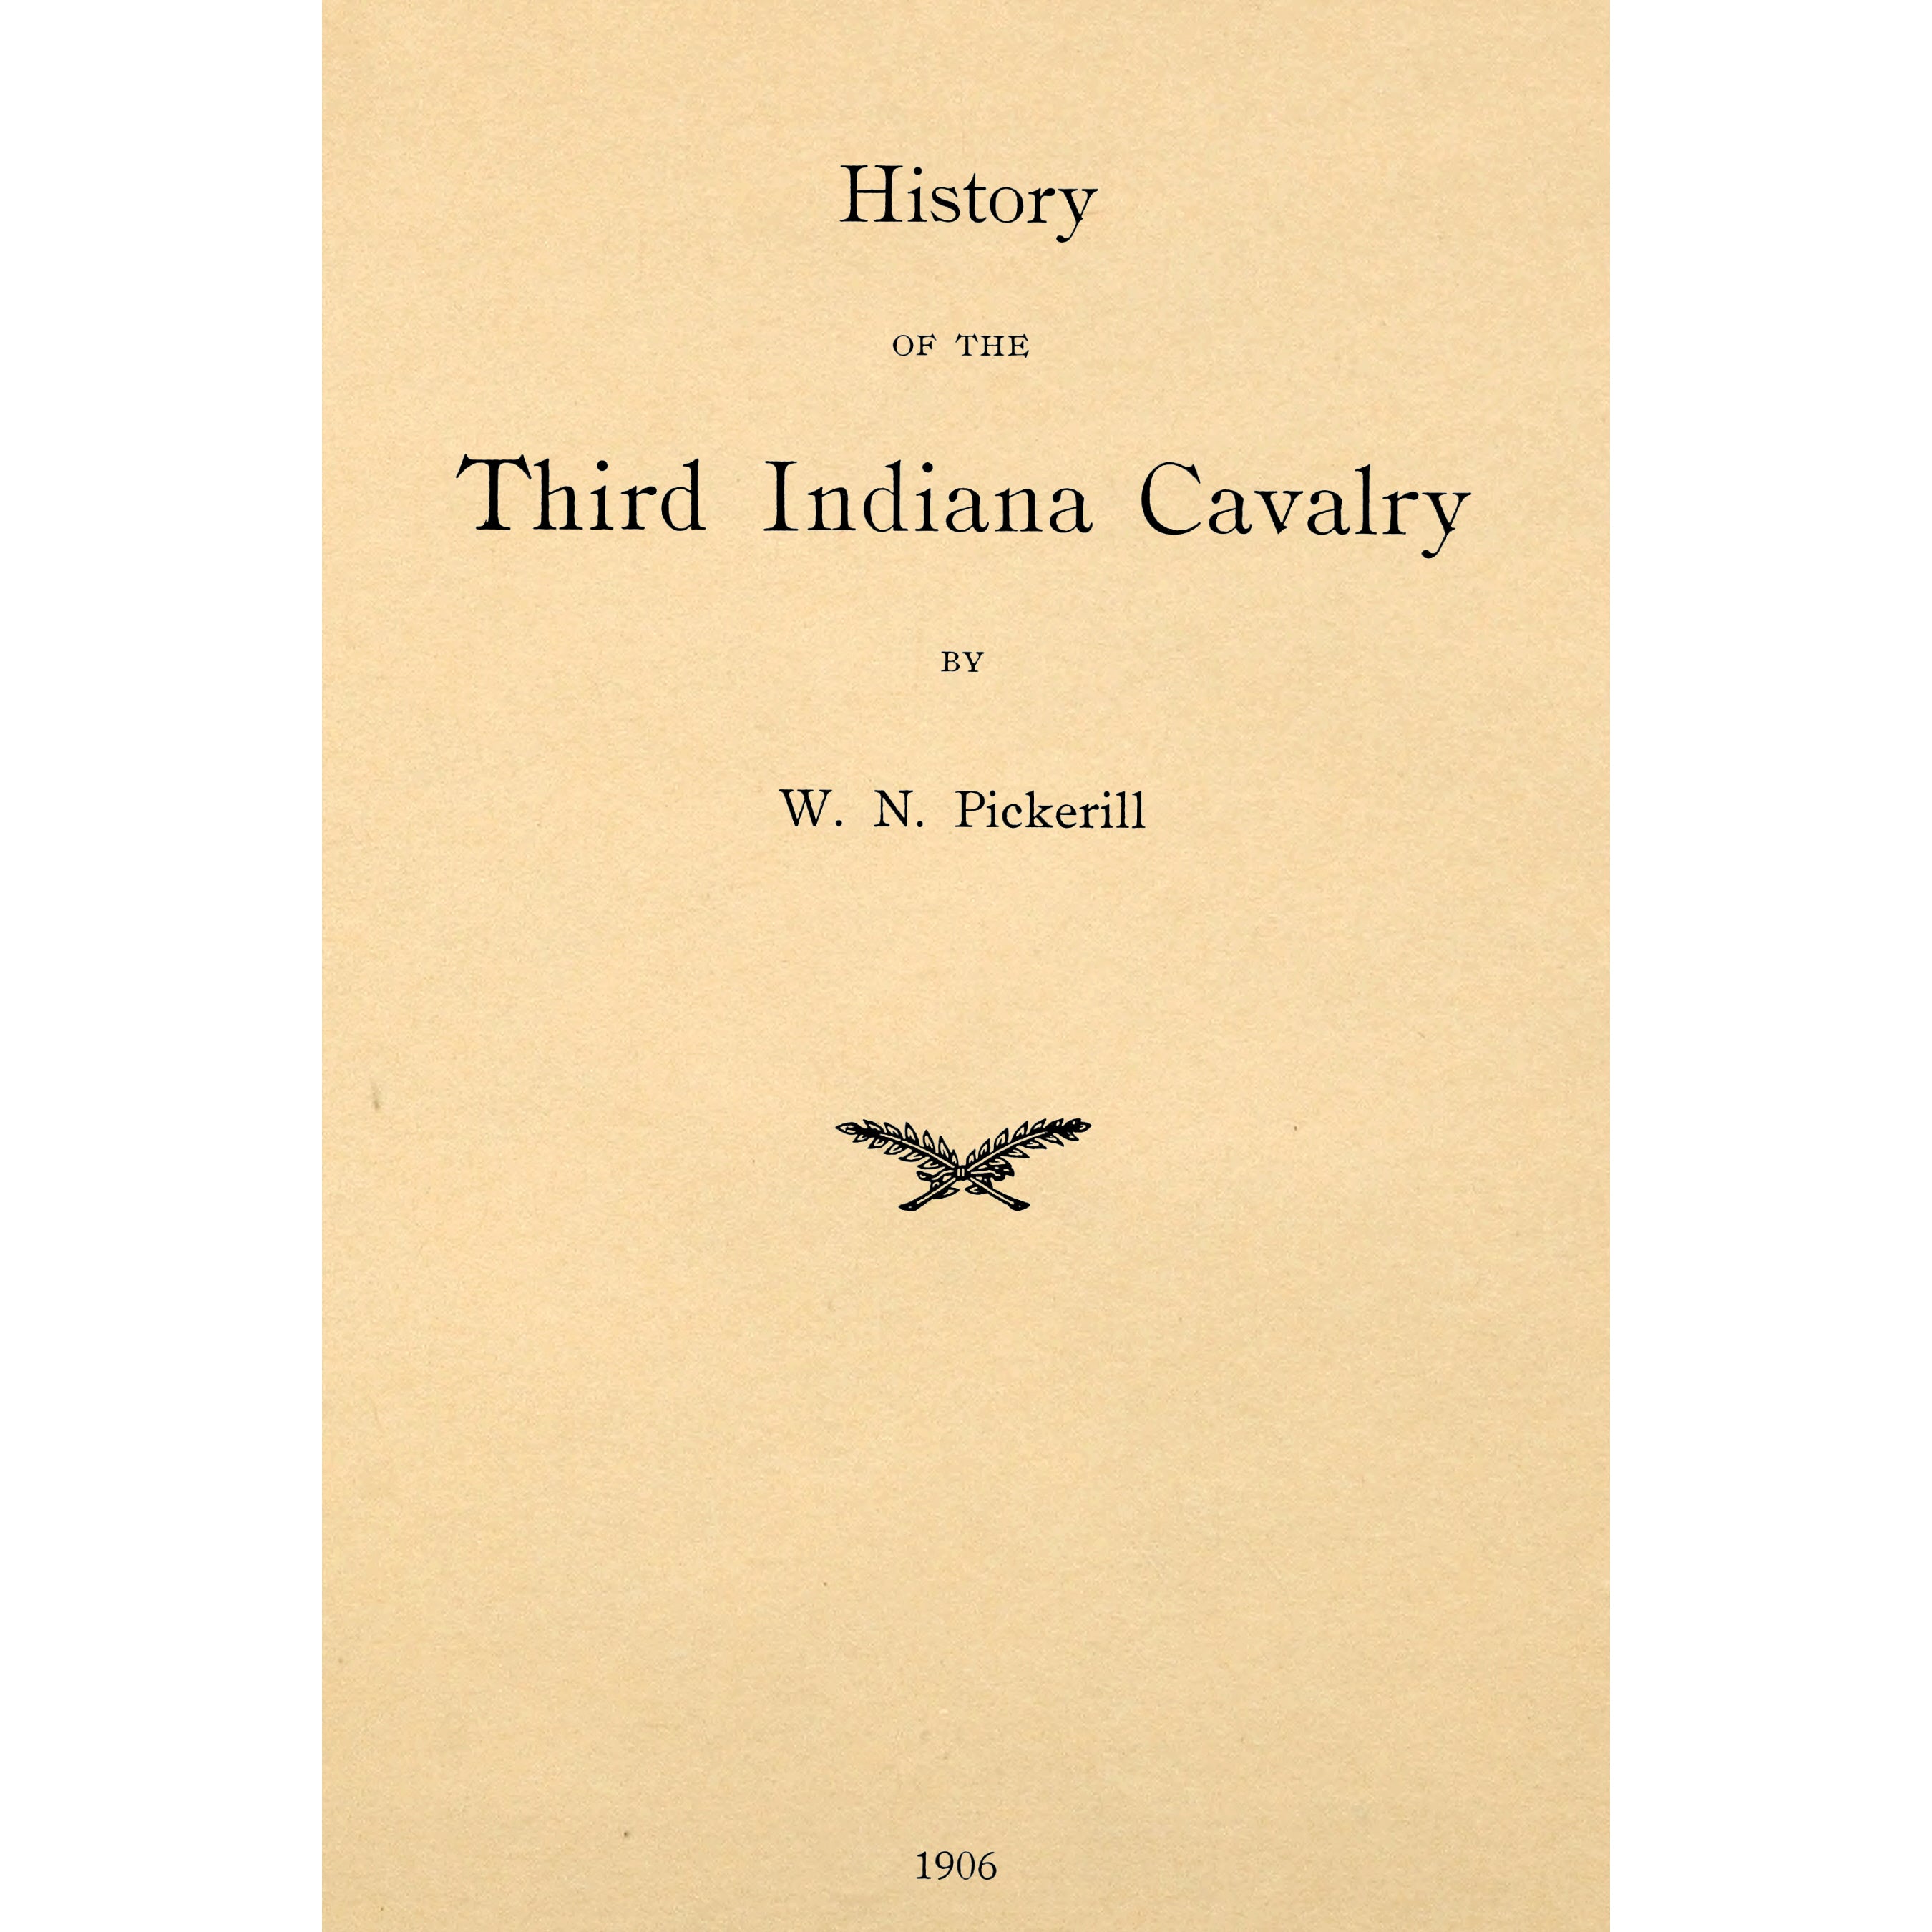 History of the Third Indiana Cavalry